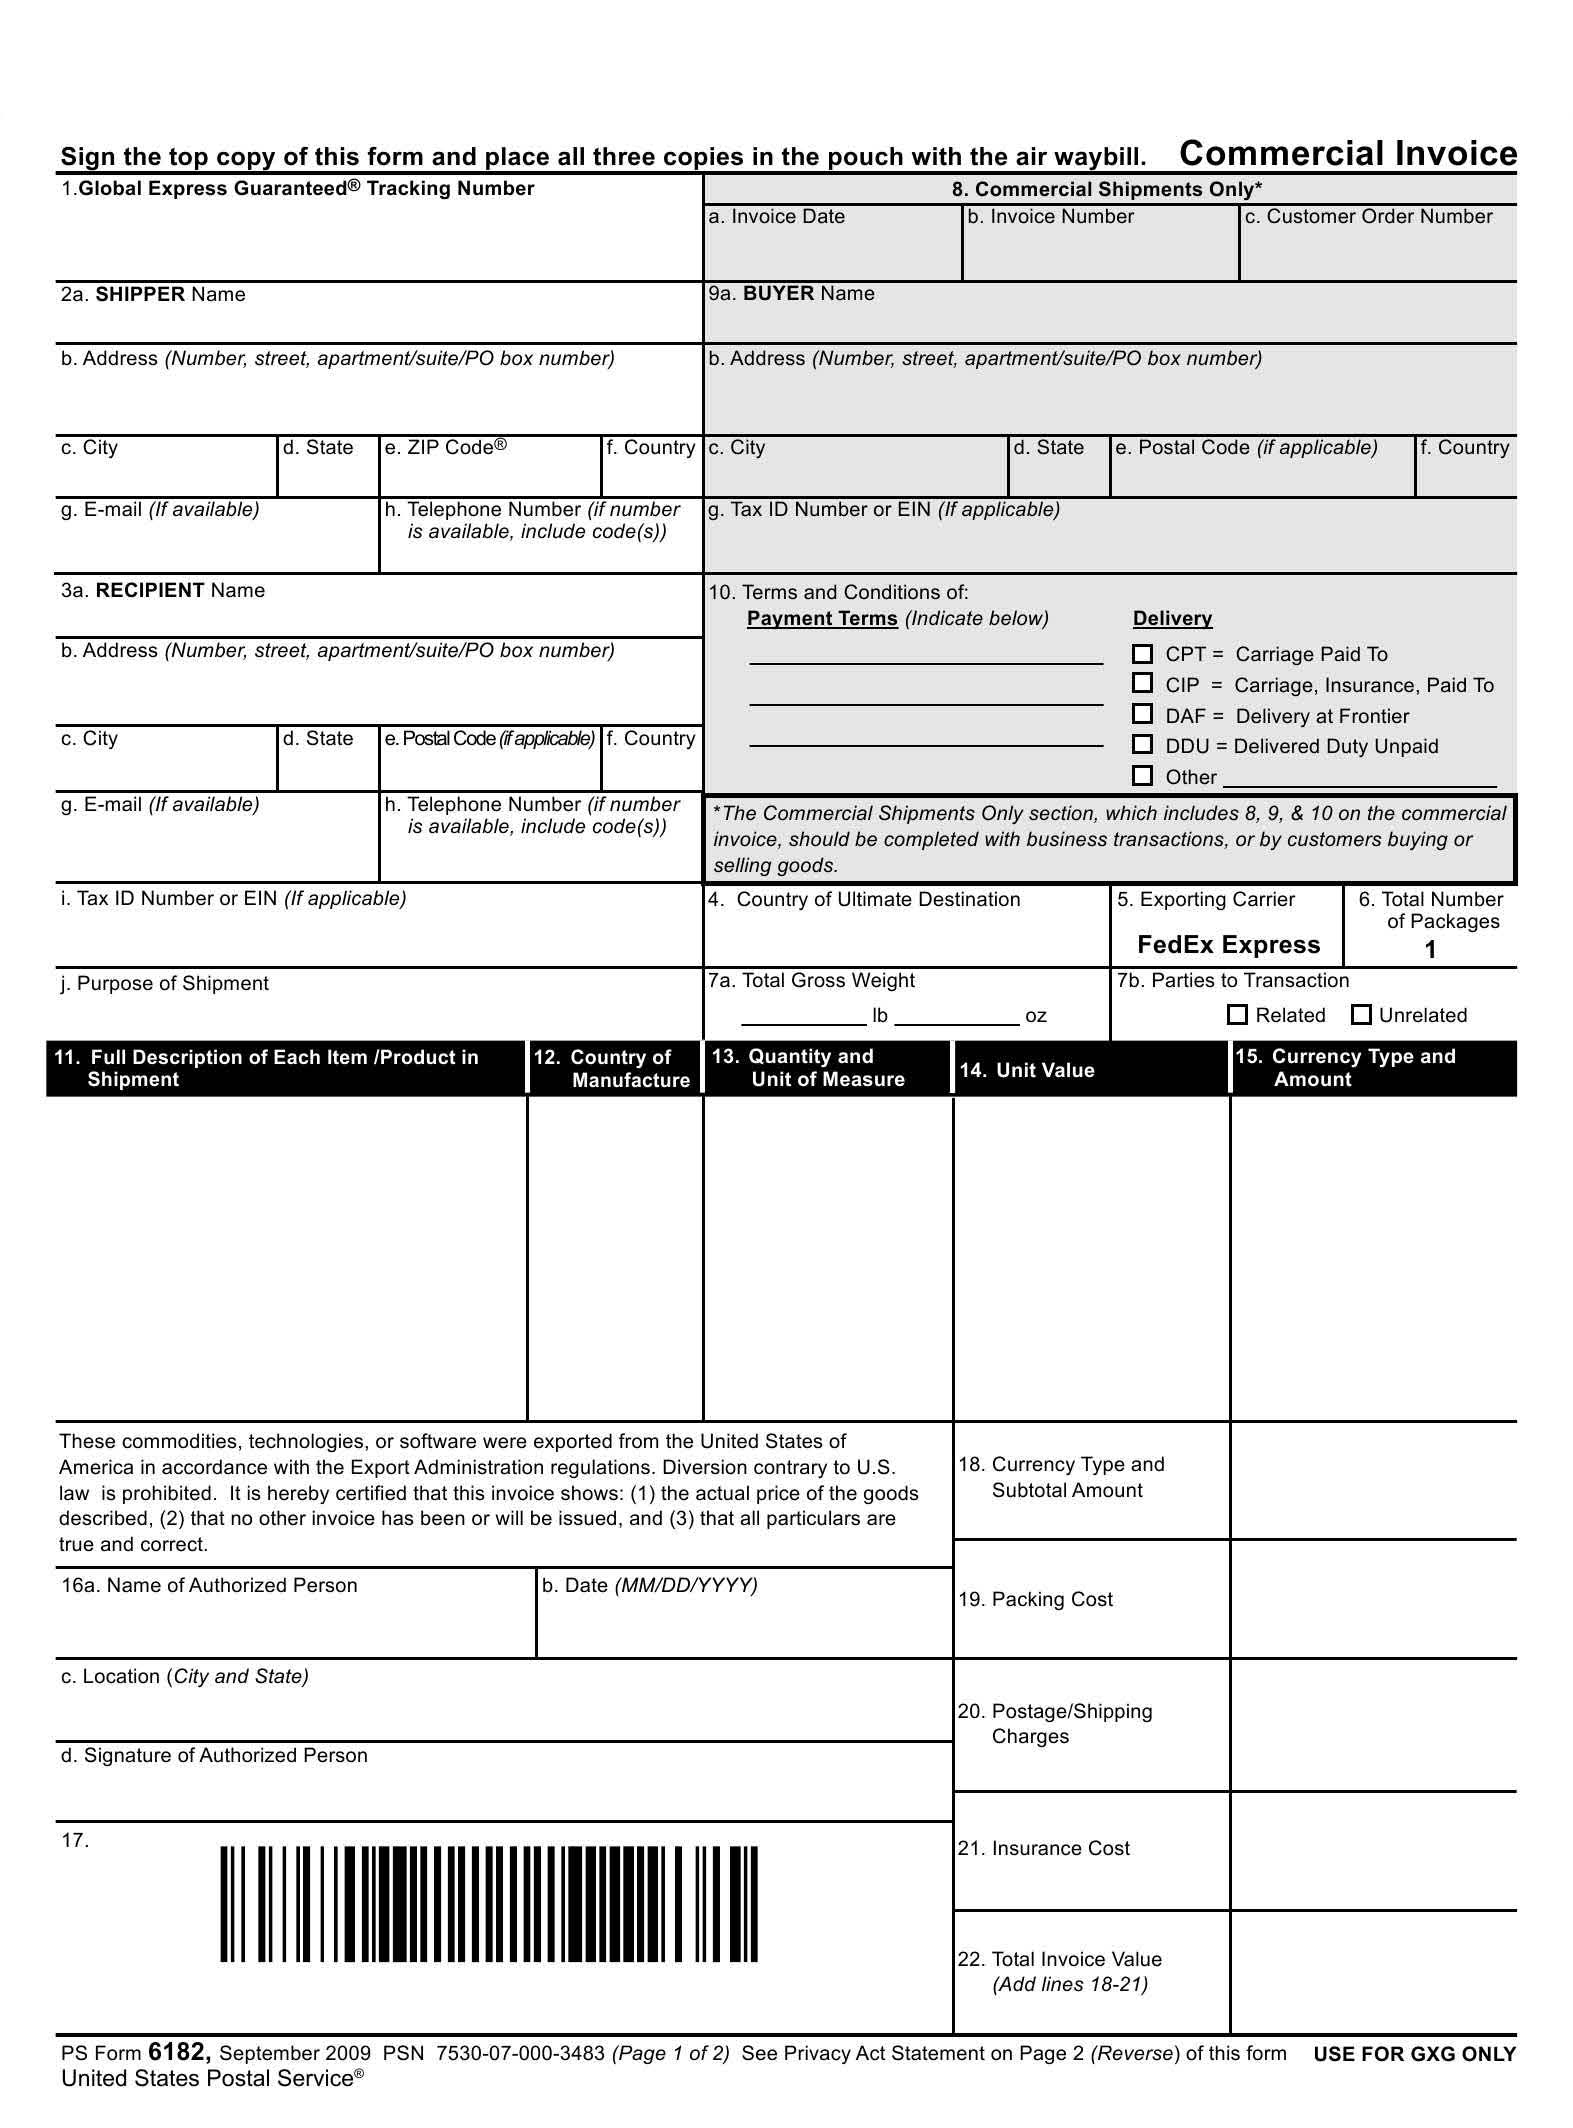 commercial invoice us customs invoice form